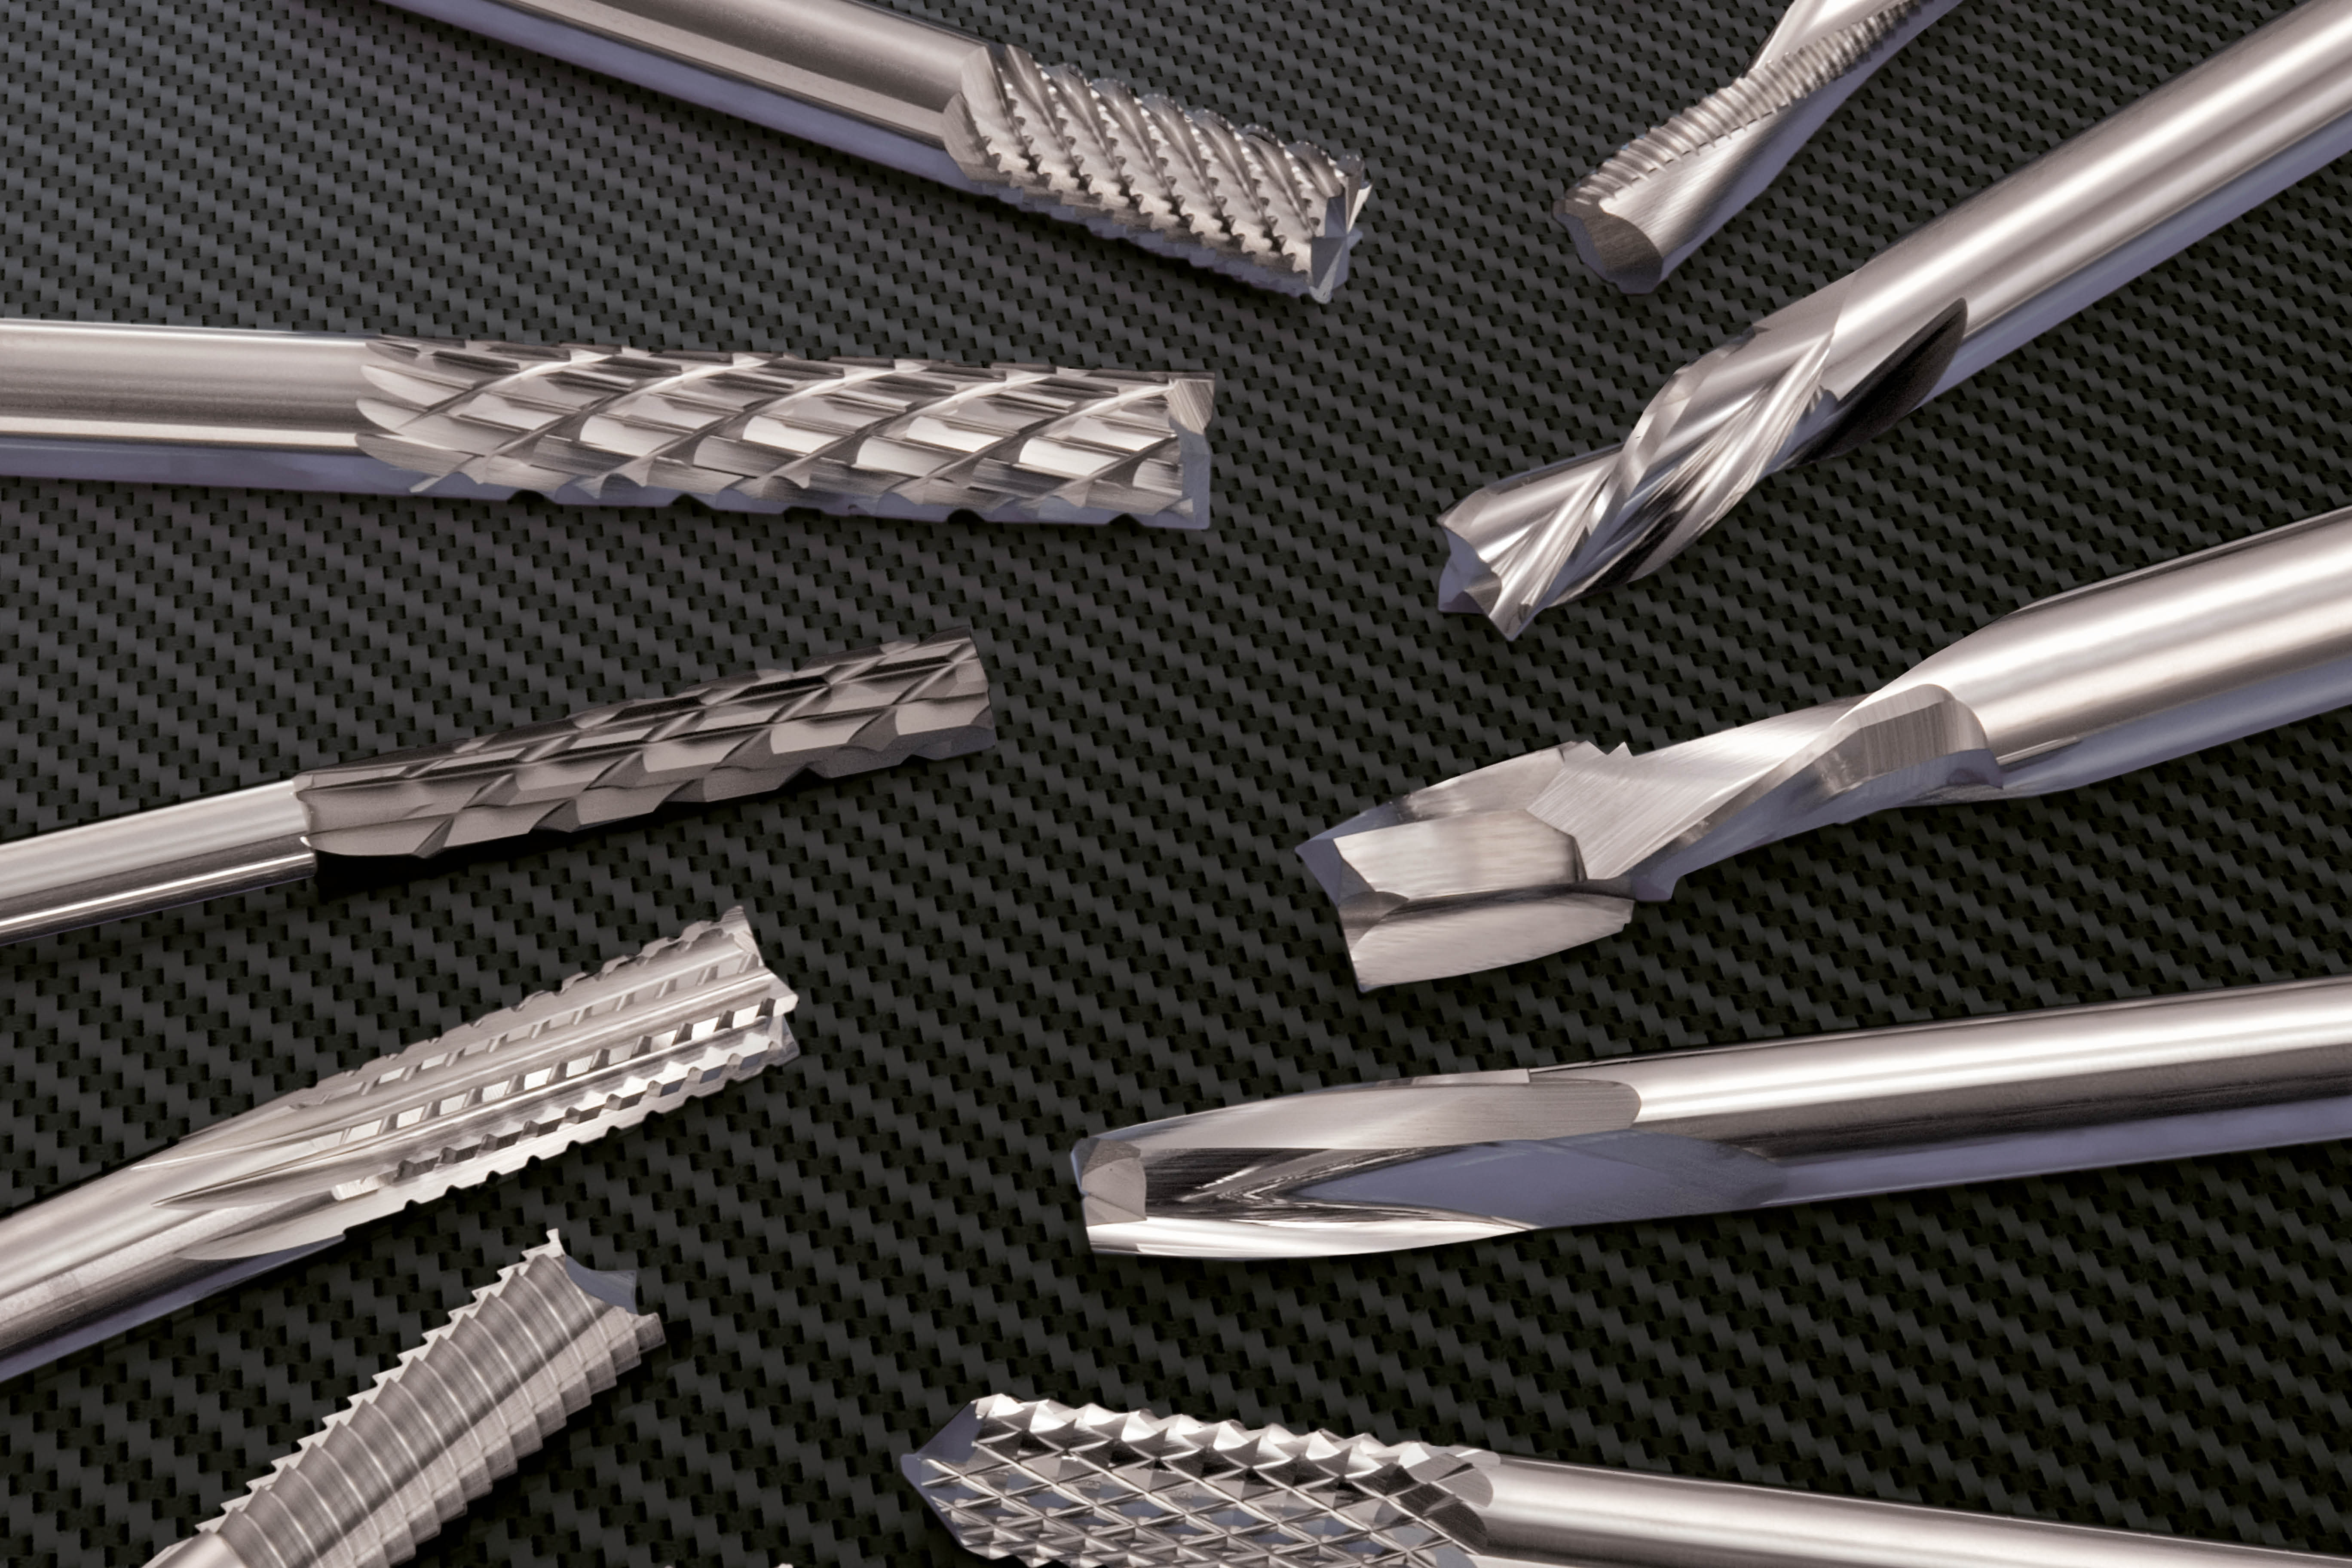 CFRP and GFRP milling with carbide end mills